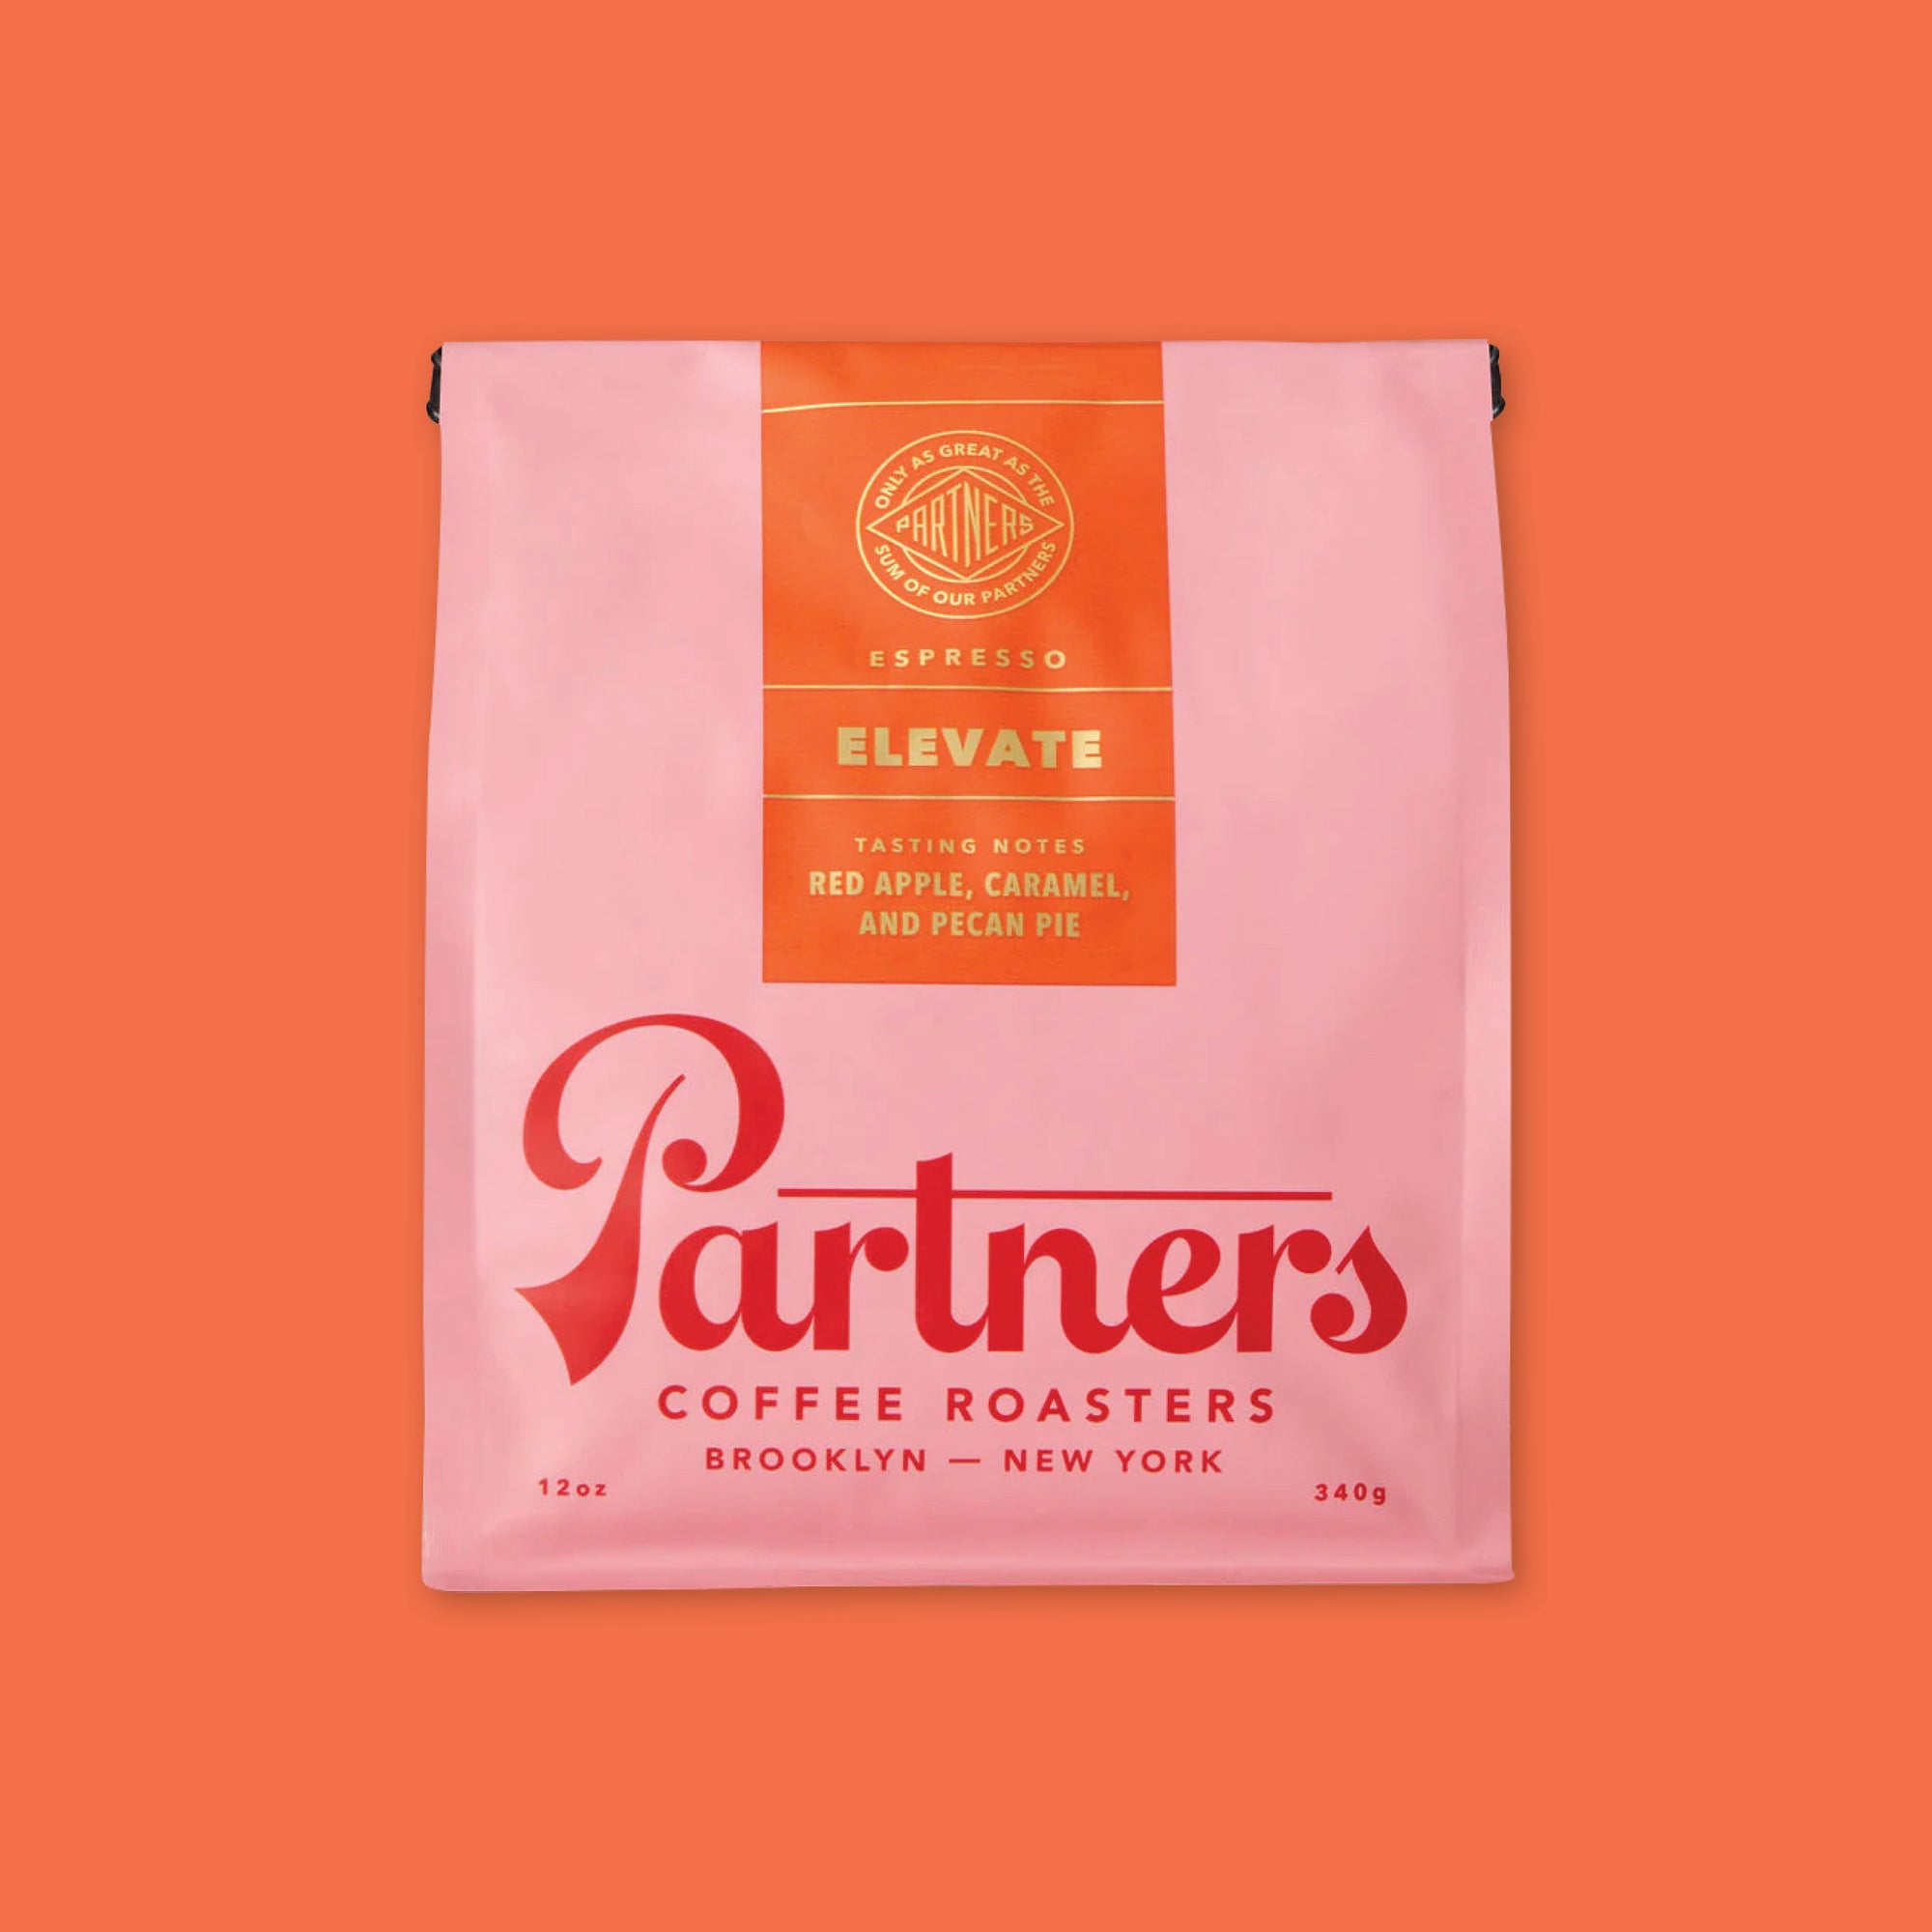 On an orangey-red background is a photo of a pink and red bag of Partners Coffee Roasters Brooklyn - New York Jumpstart Blend. Tasting notes: Red apple, caramel and pecan pie, 12 oz, 340 g